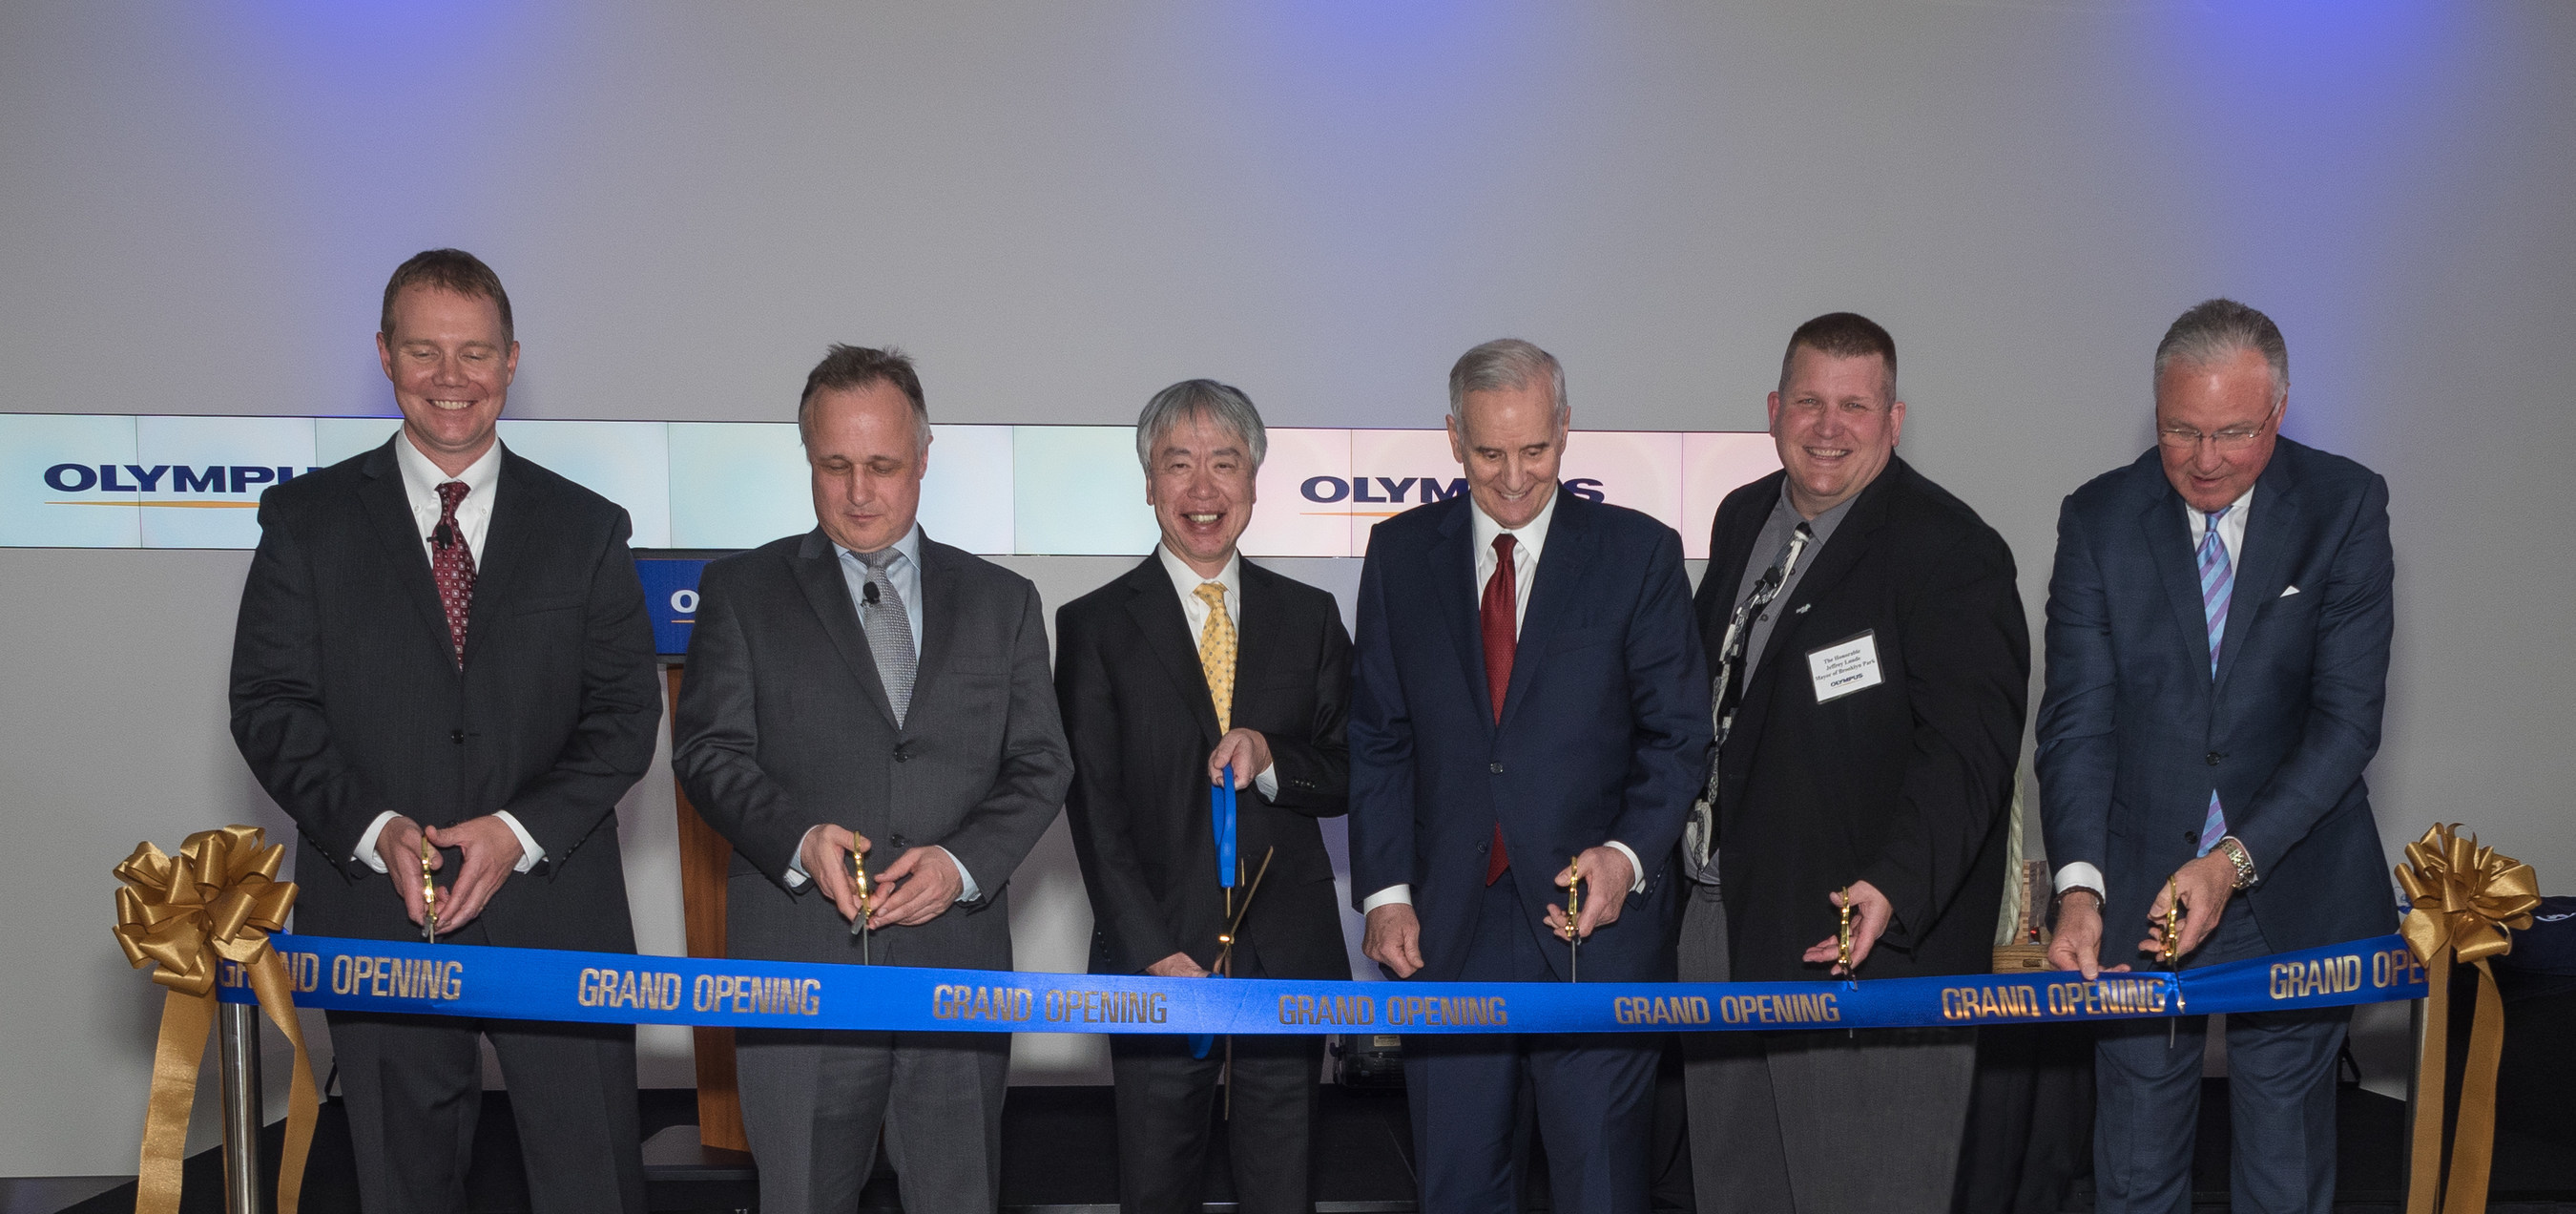 Olympus marks the official Grand Opening of its Surgical Innovation Center with a ribbon-cutting ceremony. Left to right: Scott M. Larson, Vice President, Surgical Energy Business Center, Olympus Surgical Technologies America (OSTA); Georg Schloer, President, OSTA; Hiroyuki Sasa, President, Olympus Corporation; Mark Dayton, Governor of Minnesota; Jeffrey Lunde, Mayor of Brooklyn Park, Minnesota; Michael Langley, CEO, Greater MSP